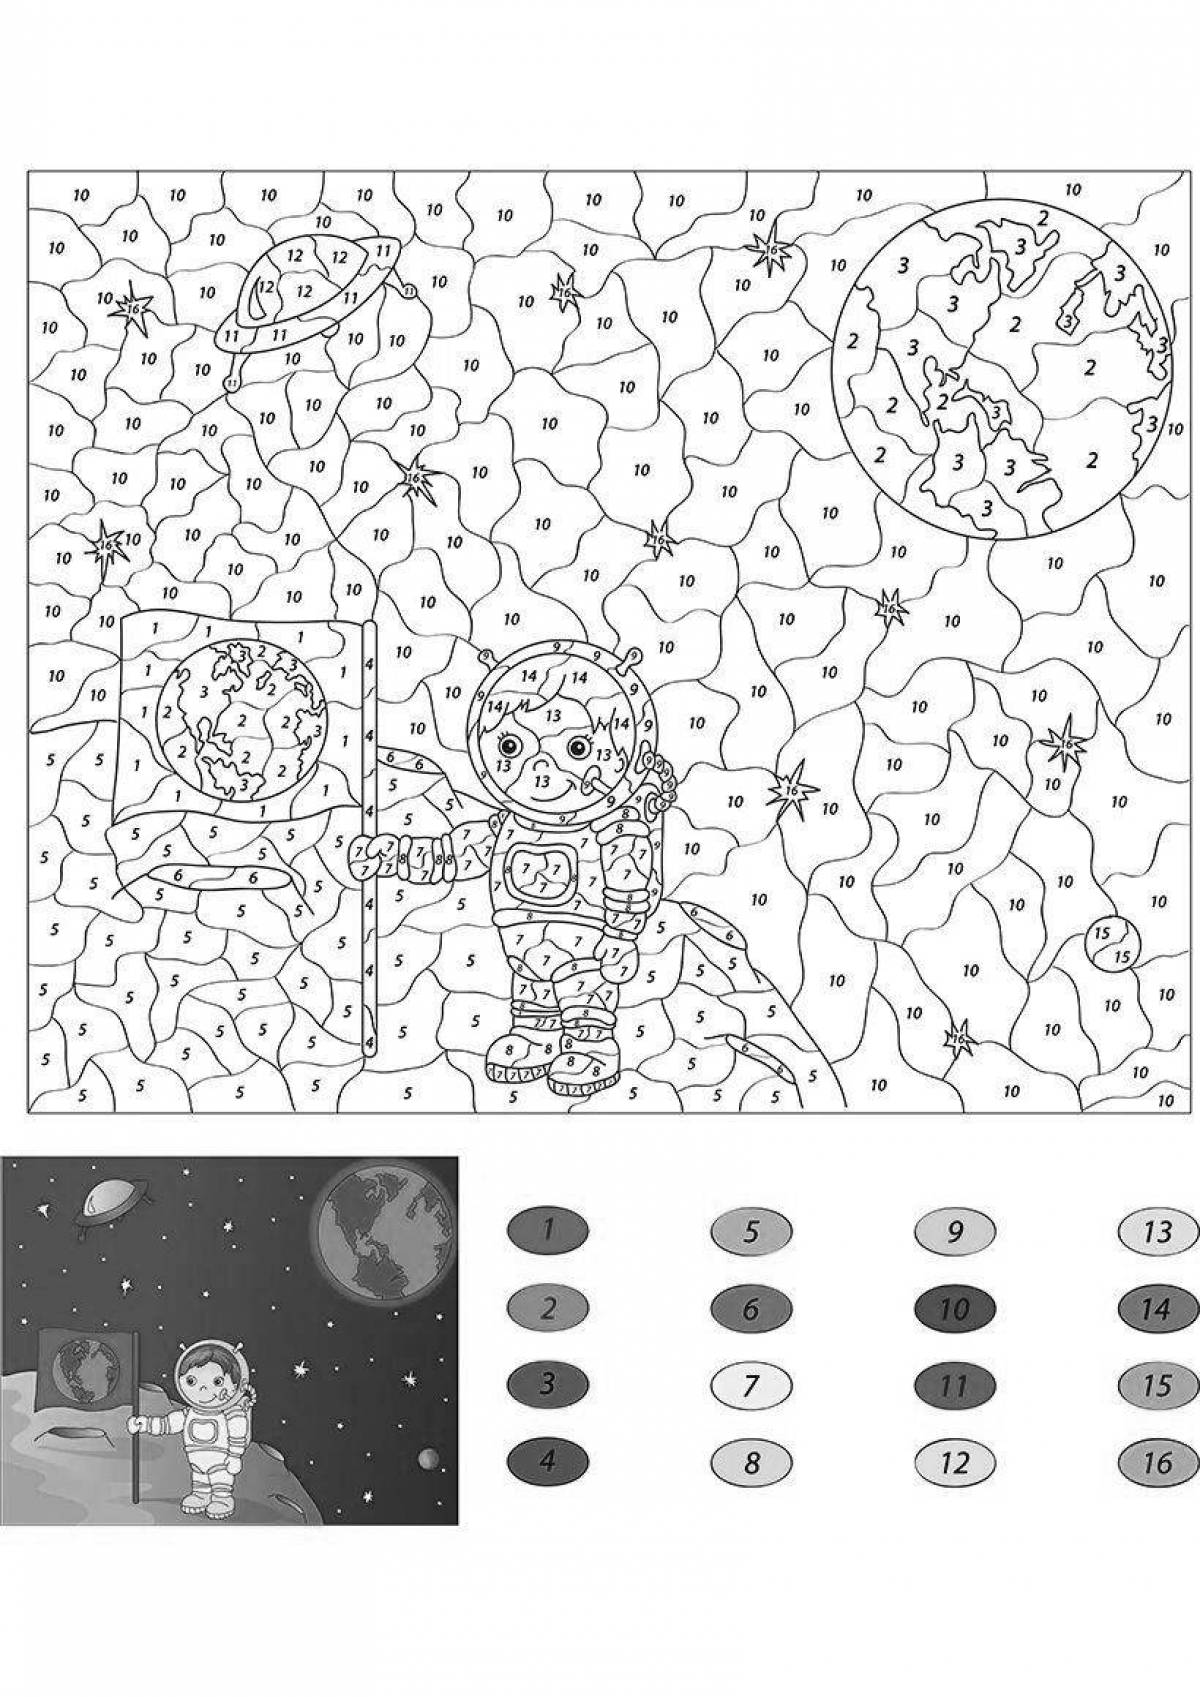 Colorful coloring game by numbers